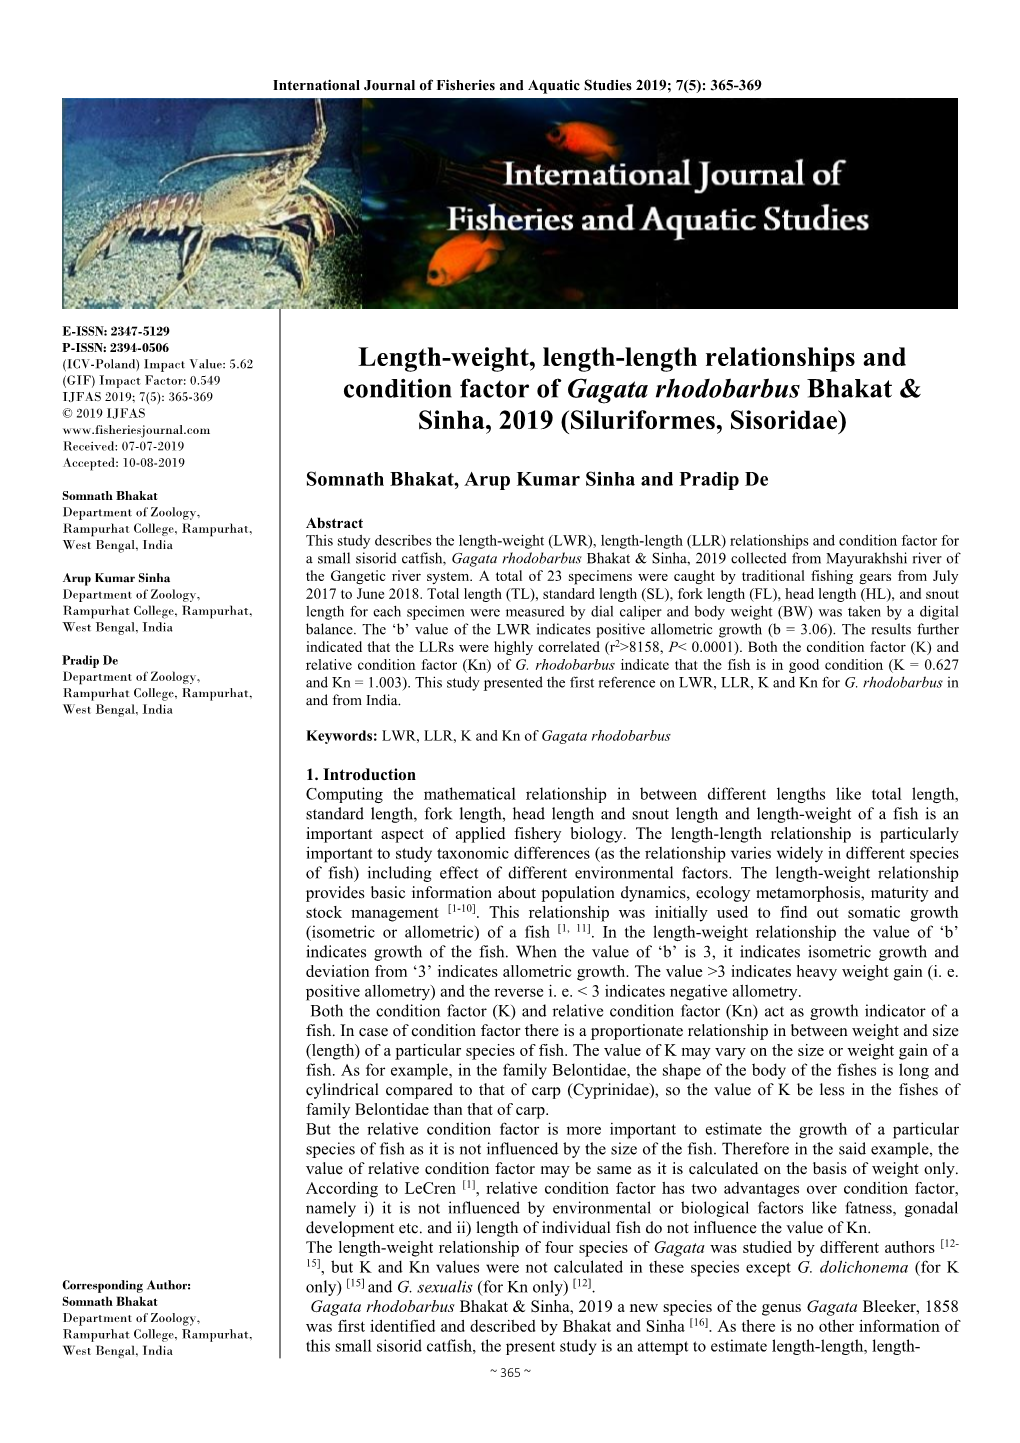 Length-Weight, Length-Length Relationships and Condition Factor of Gagata Rhodobarbus Bhakat & Sinha, 2019 (Siluriformes, Si